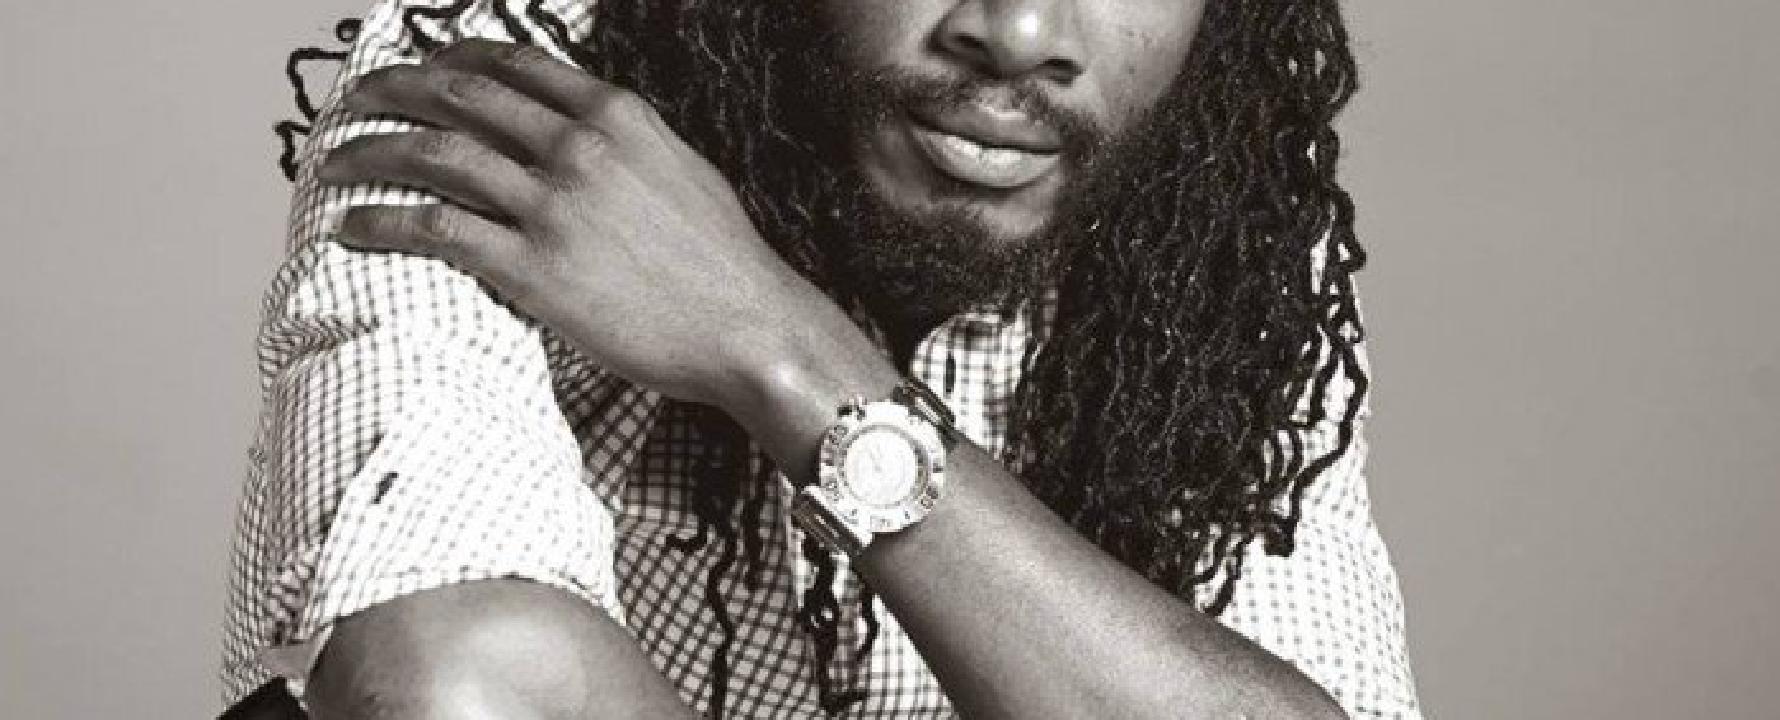 Promotional photograph of Gyptian.